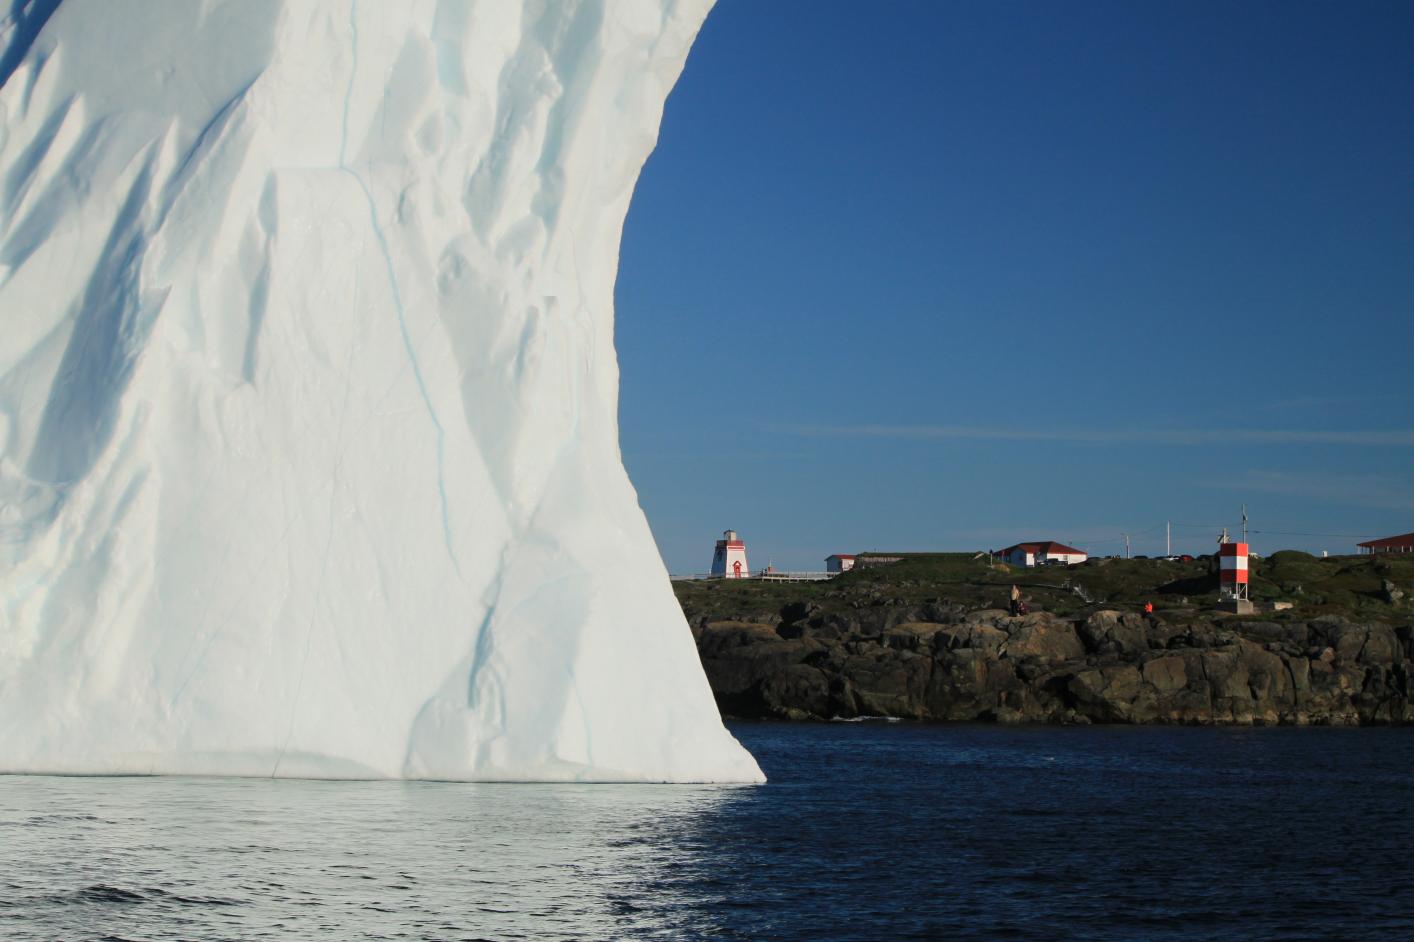 Iceberg at the mouth of St. Anthony's Harbor